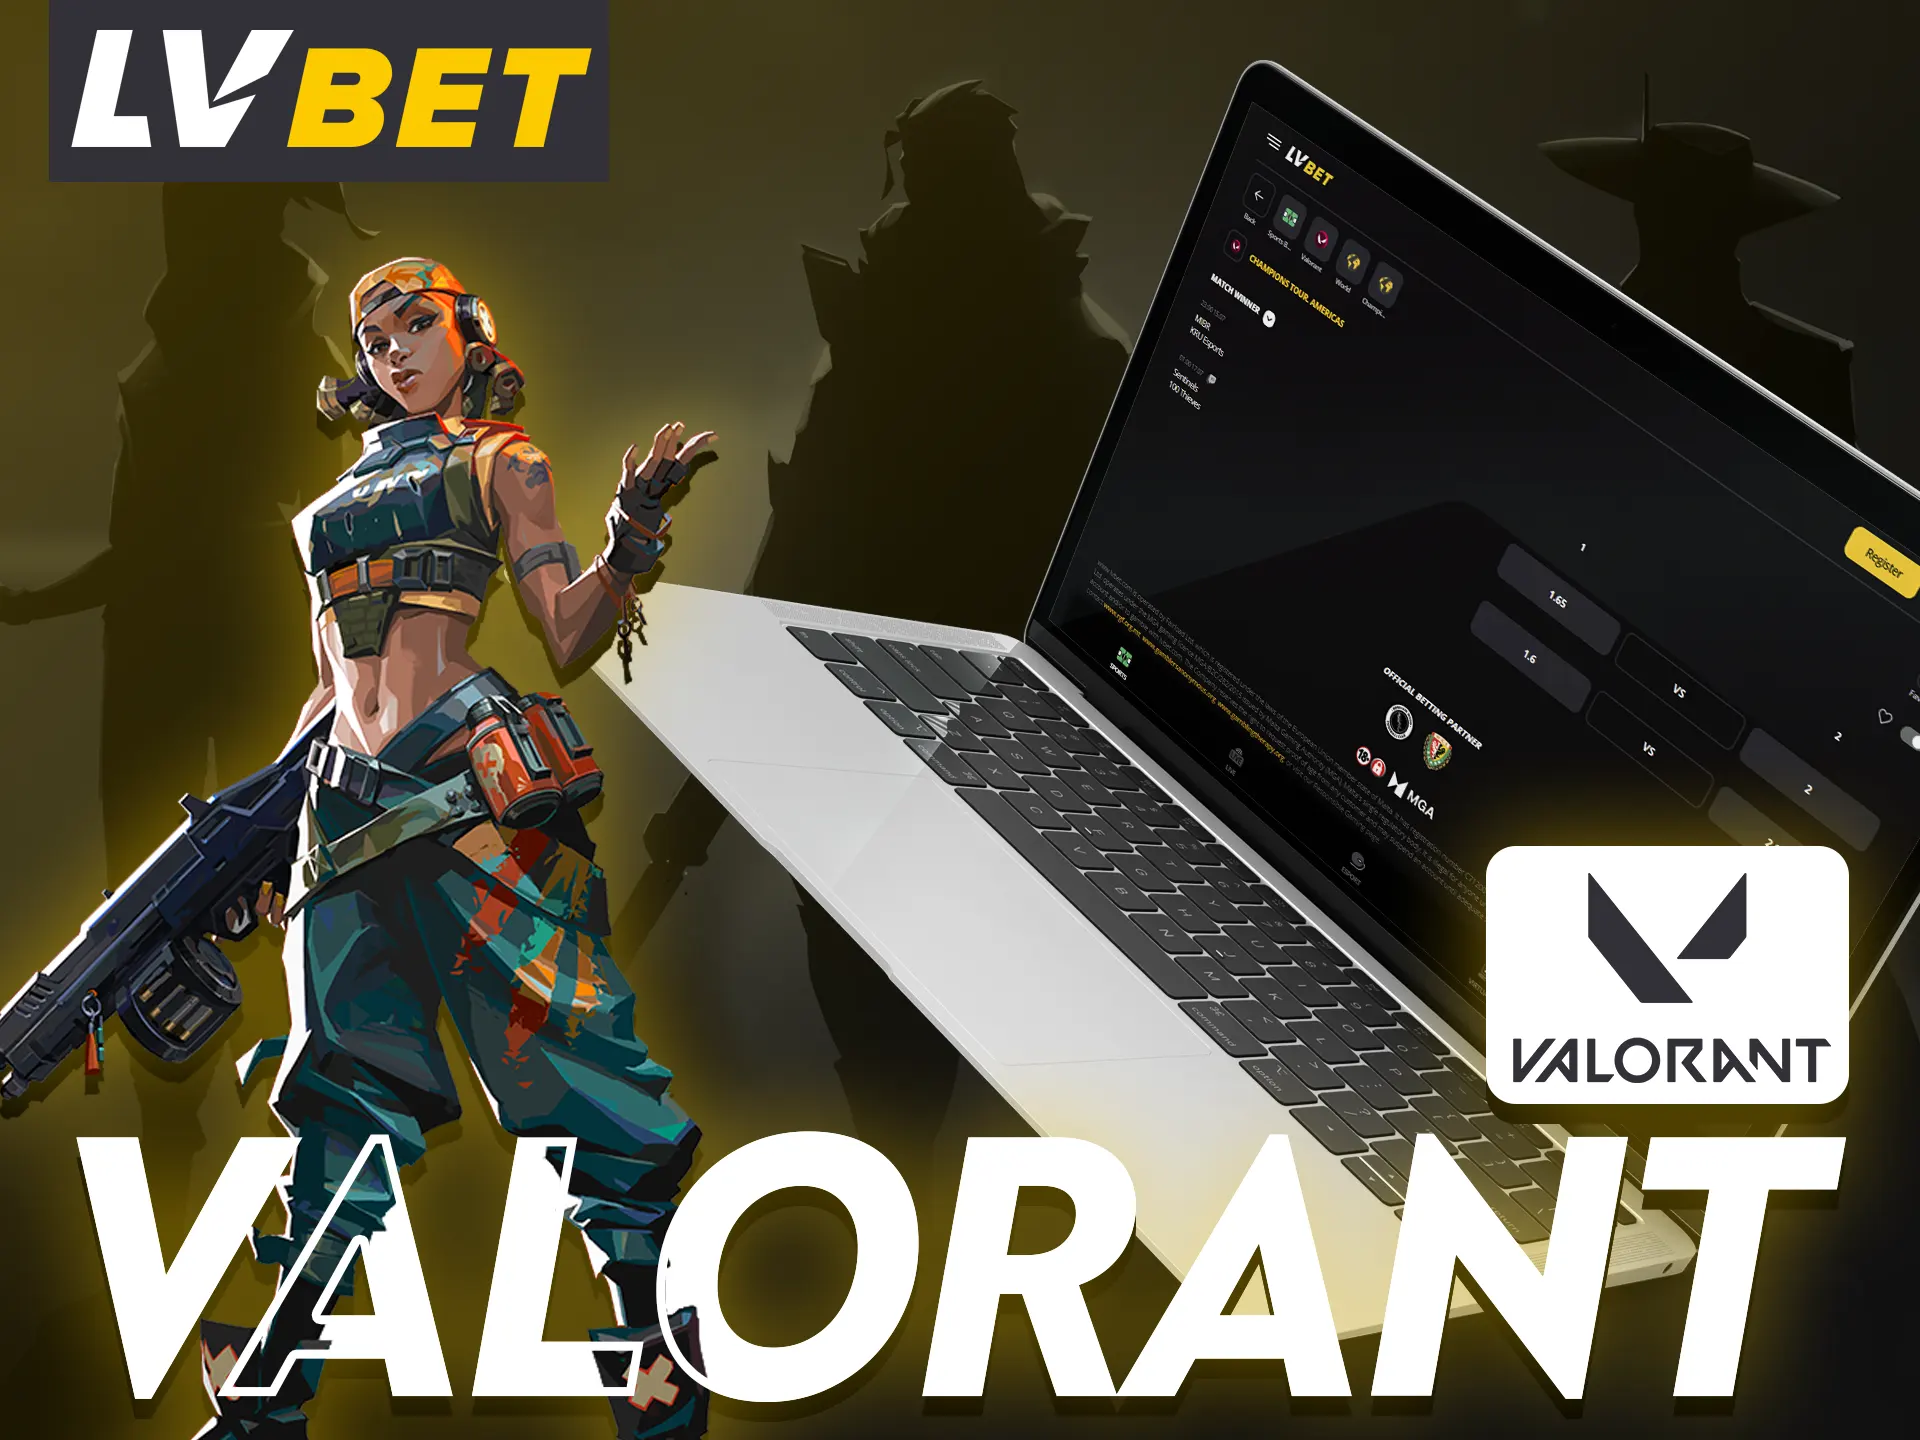 Bet on Valorant at LV Bet.